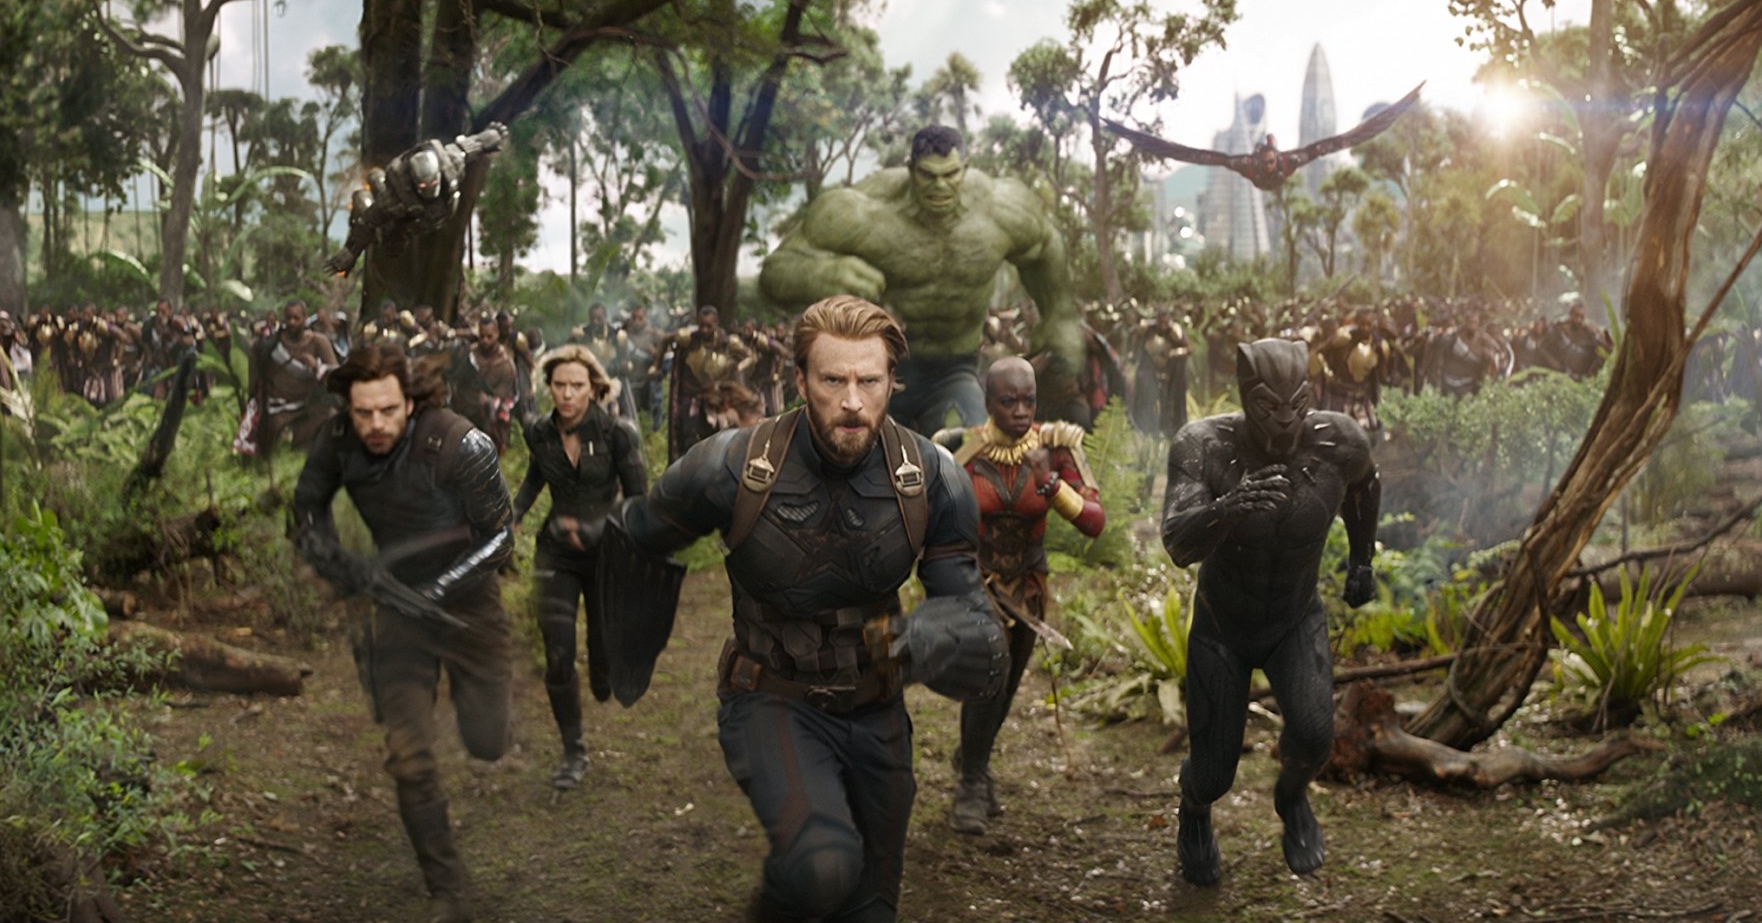 AVENGERS: INFINITY WAR Presents a Dark Chapter in the Marvel Series